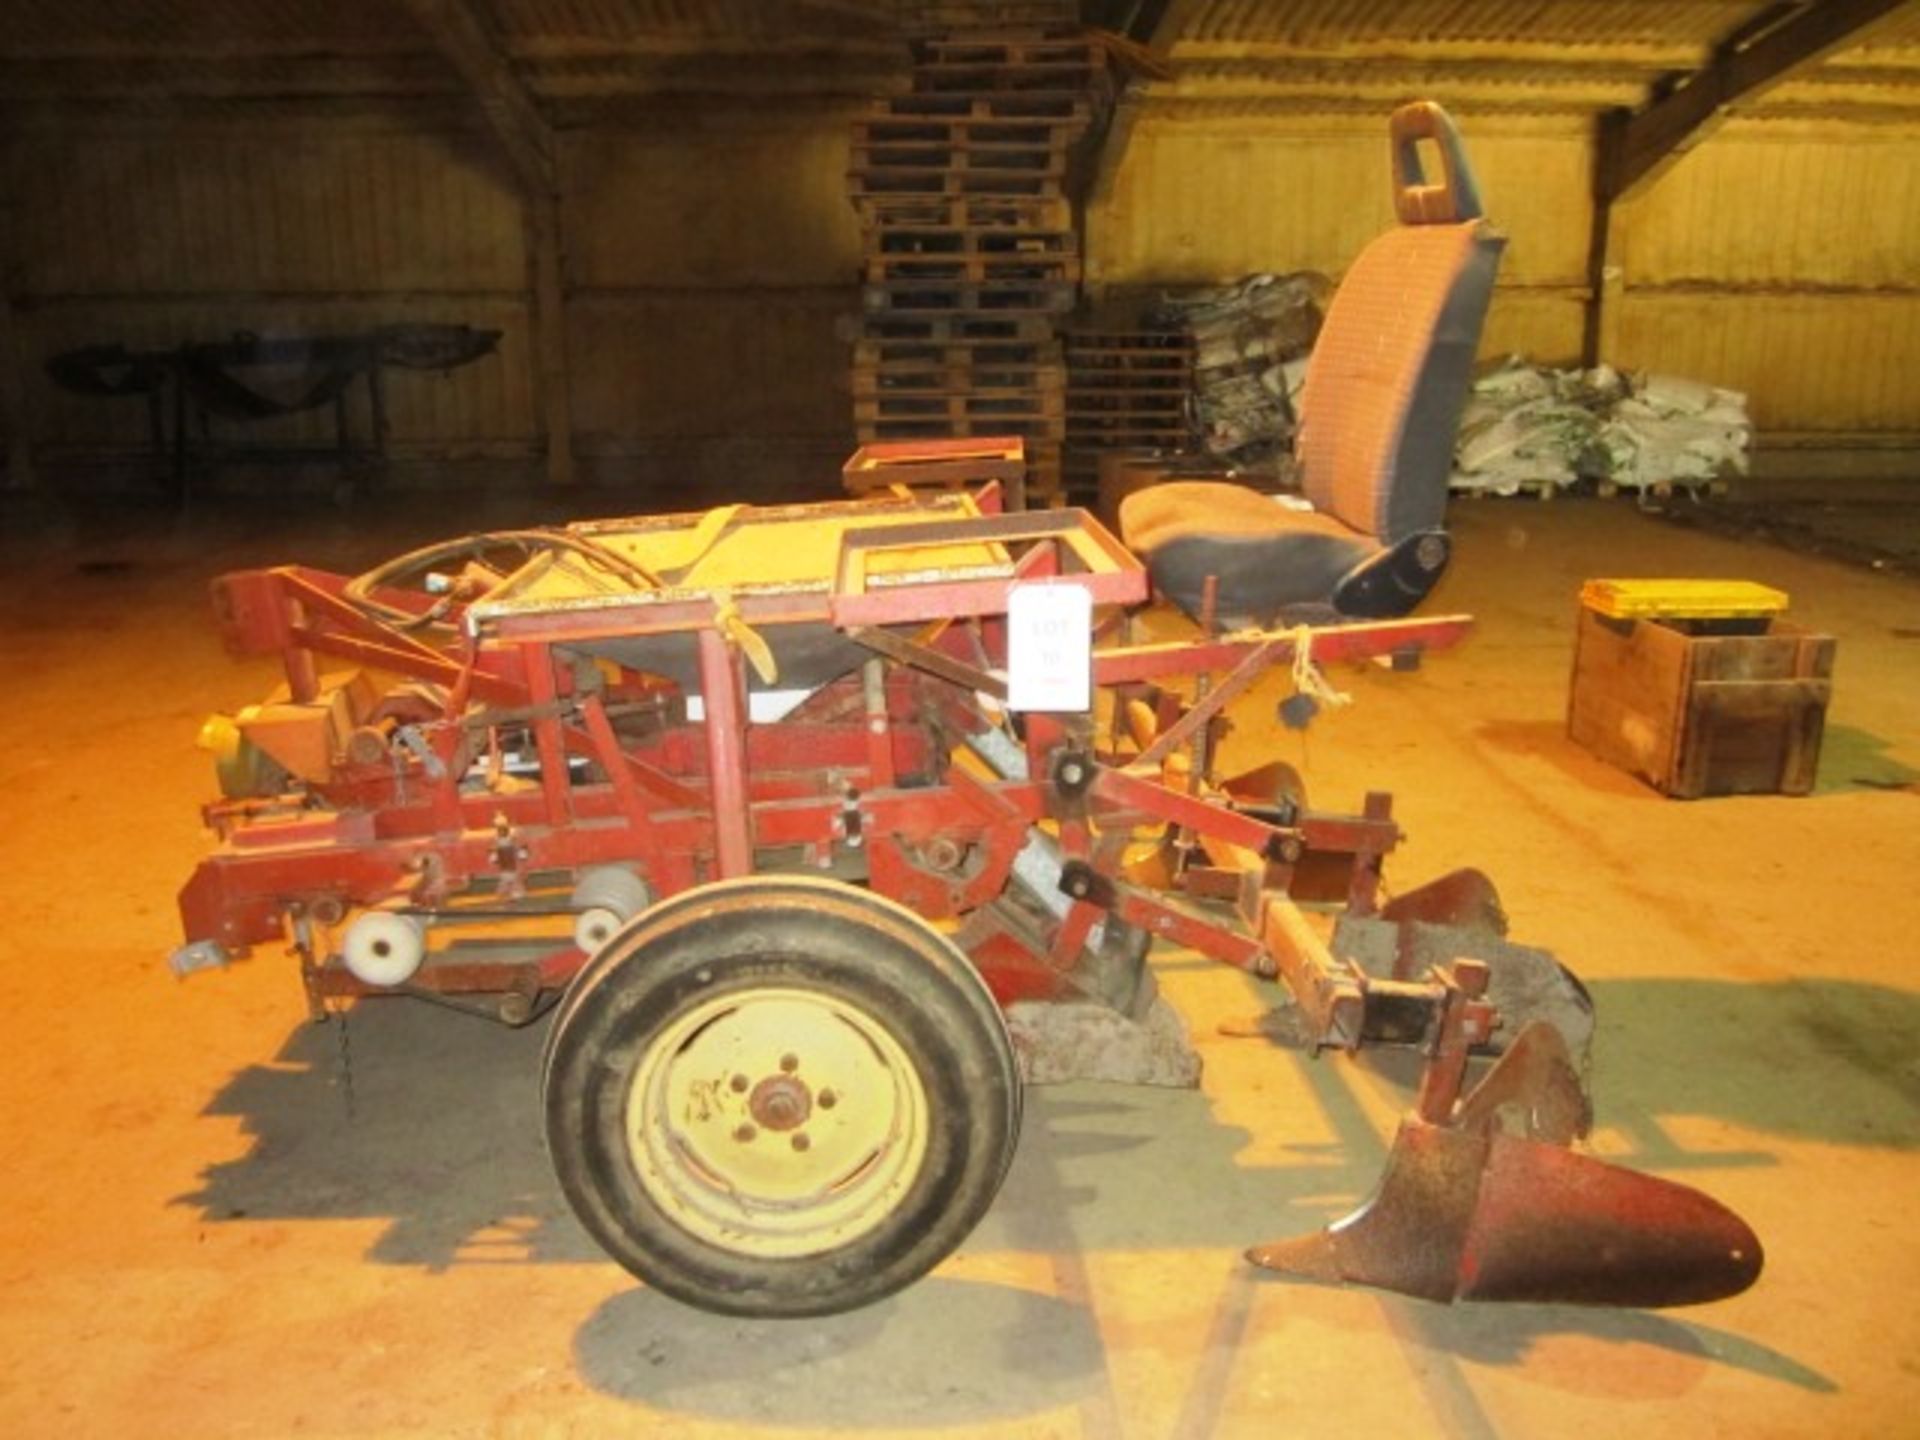 3 point tractor linkage mounted POT driven adapted ride on mini tuber planter with manual feed